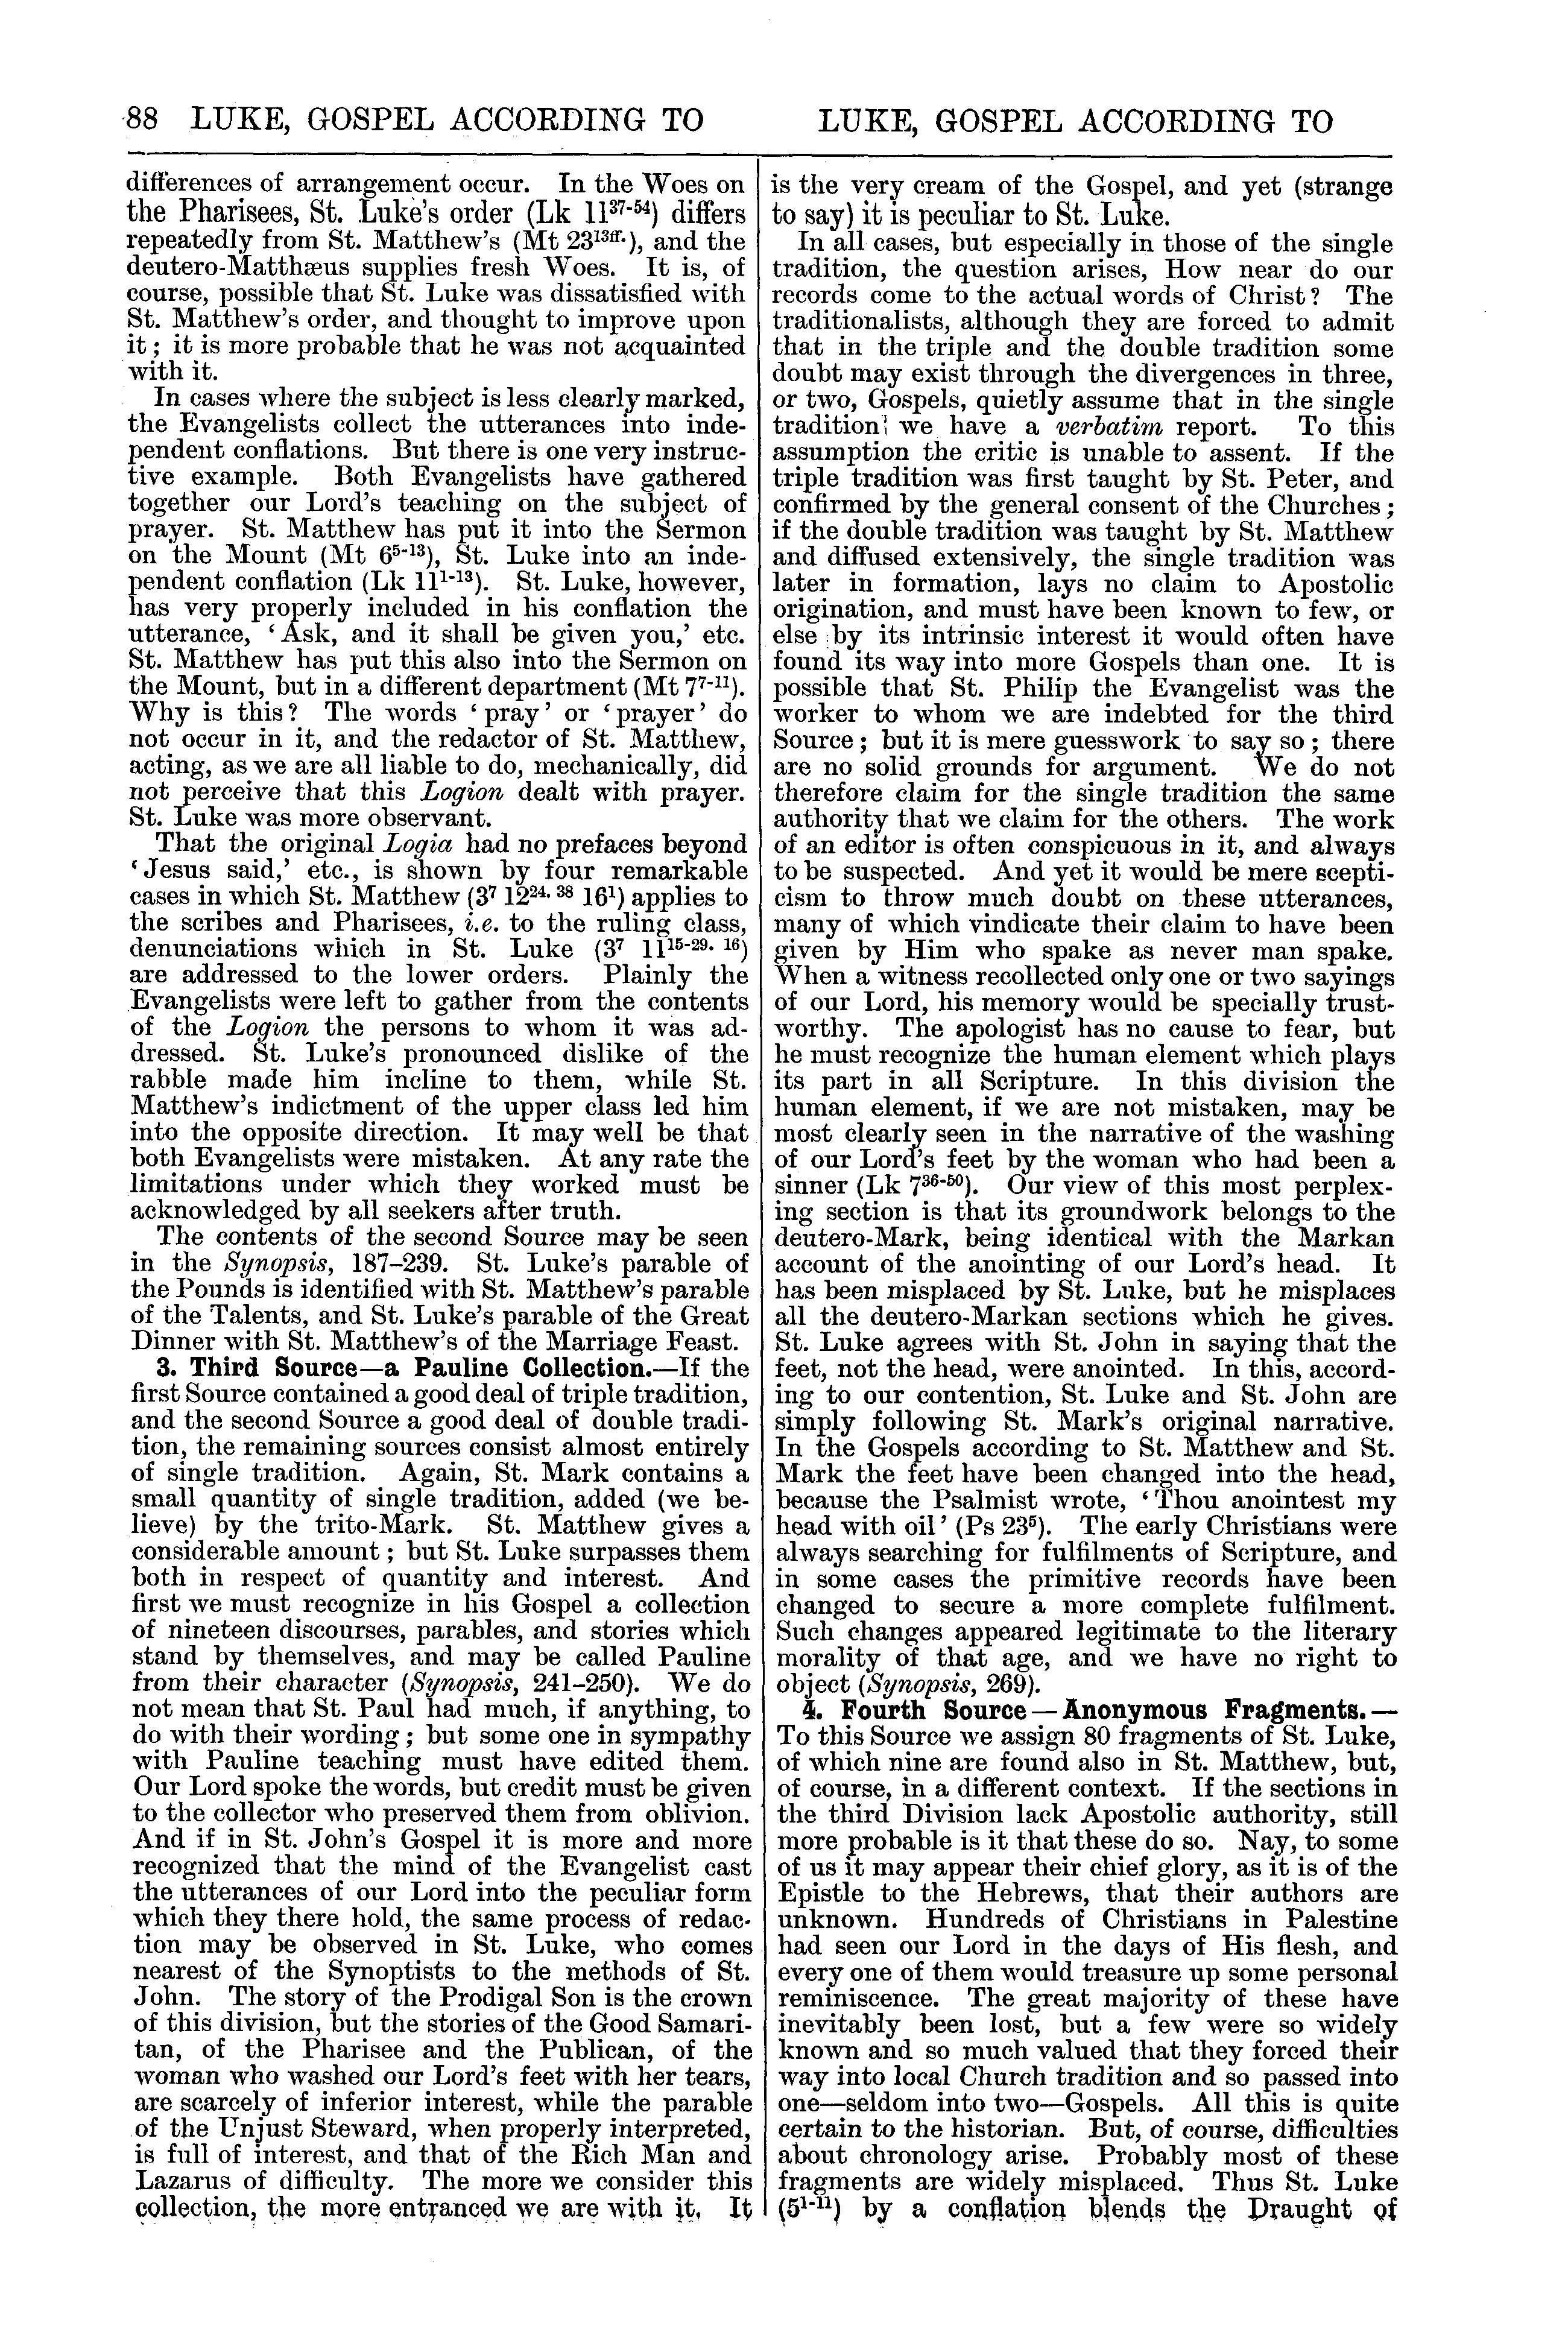 Image of page 88